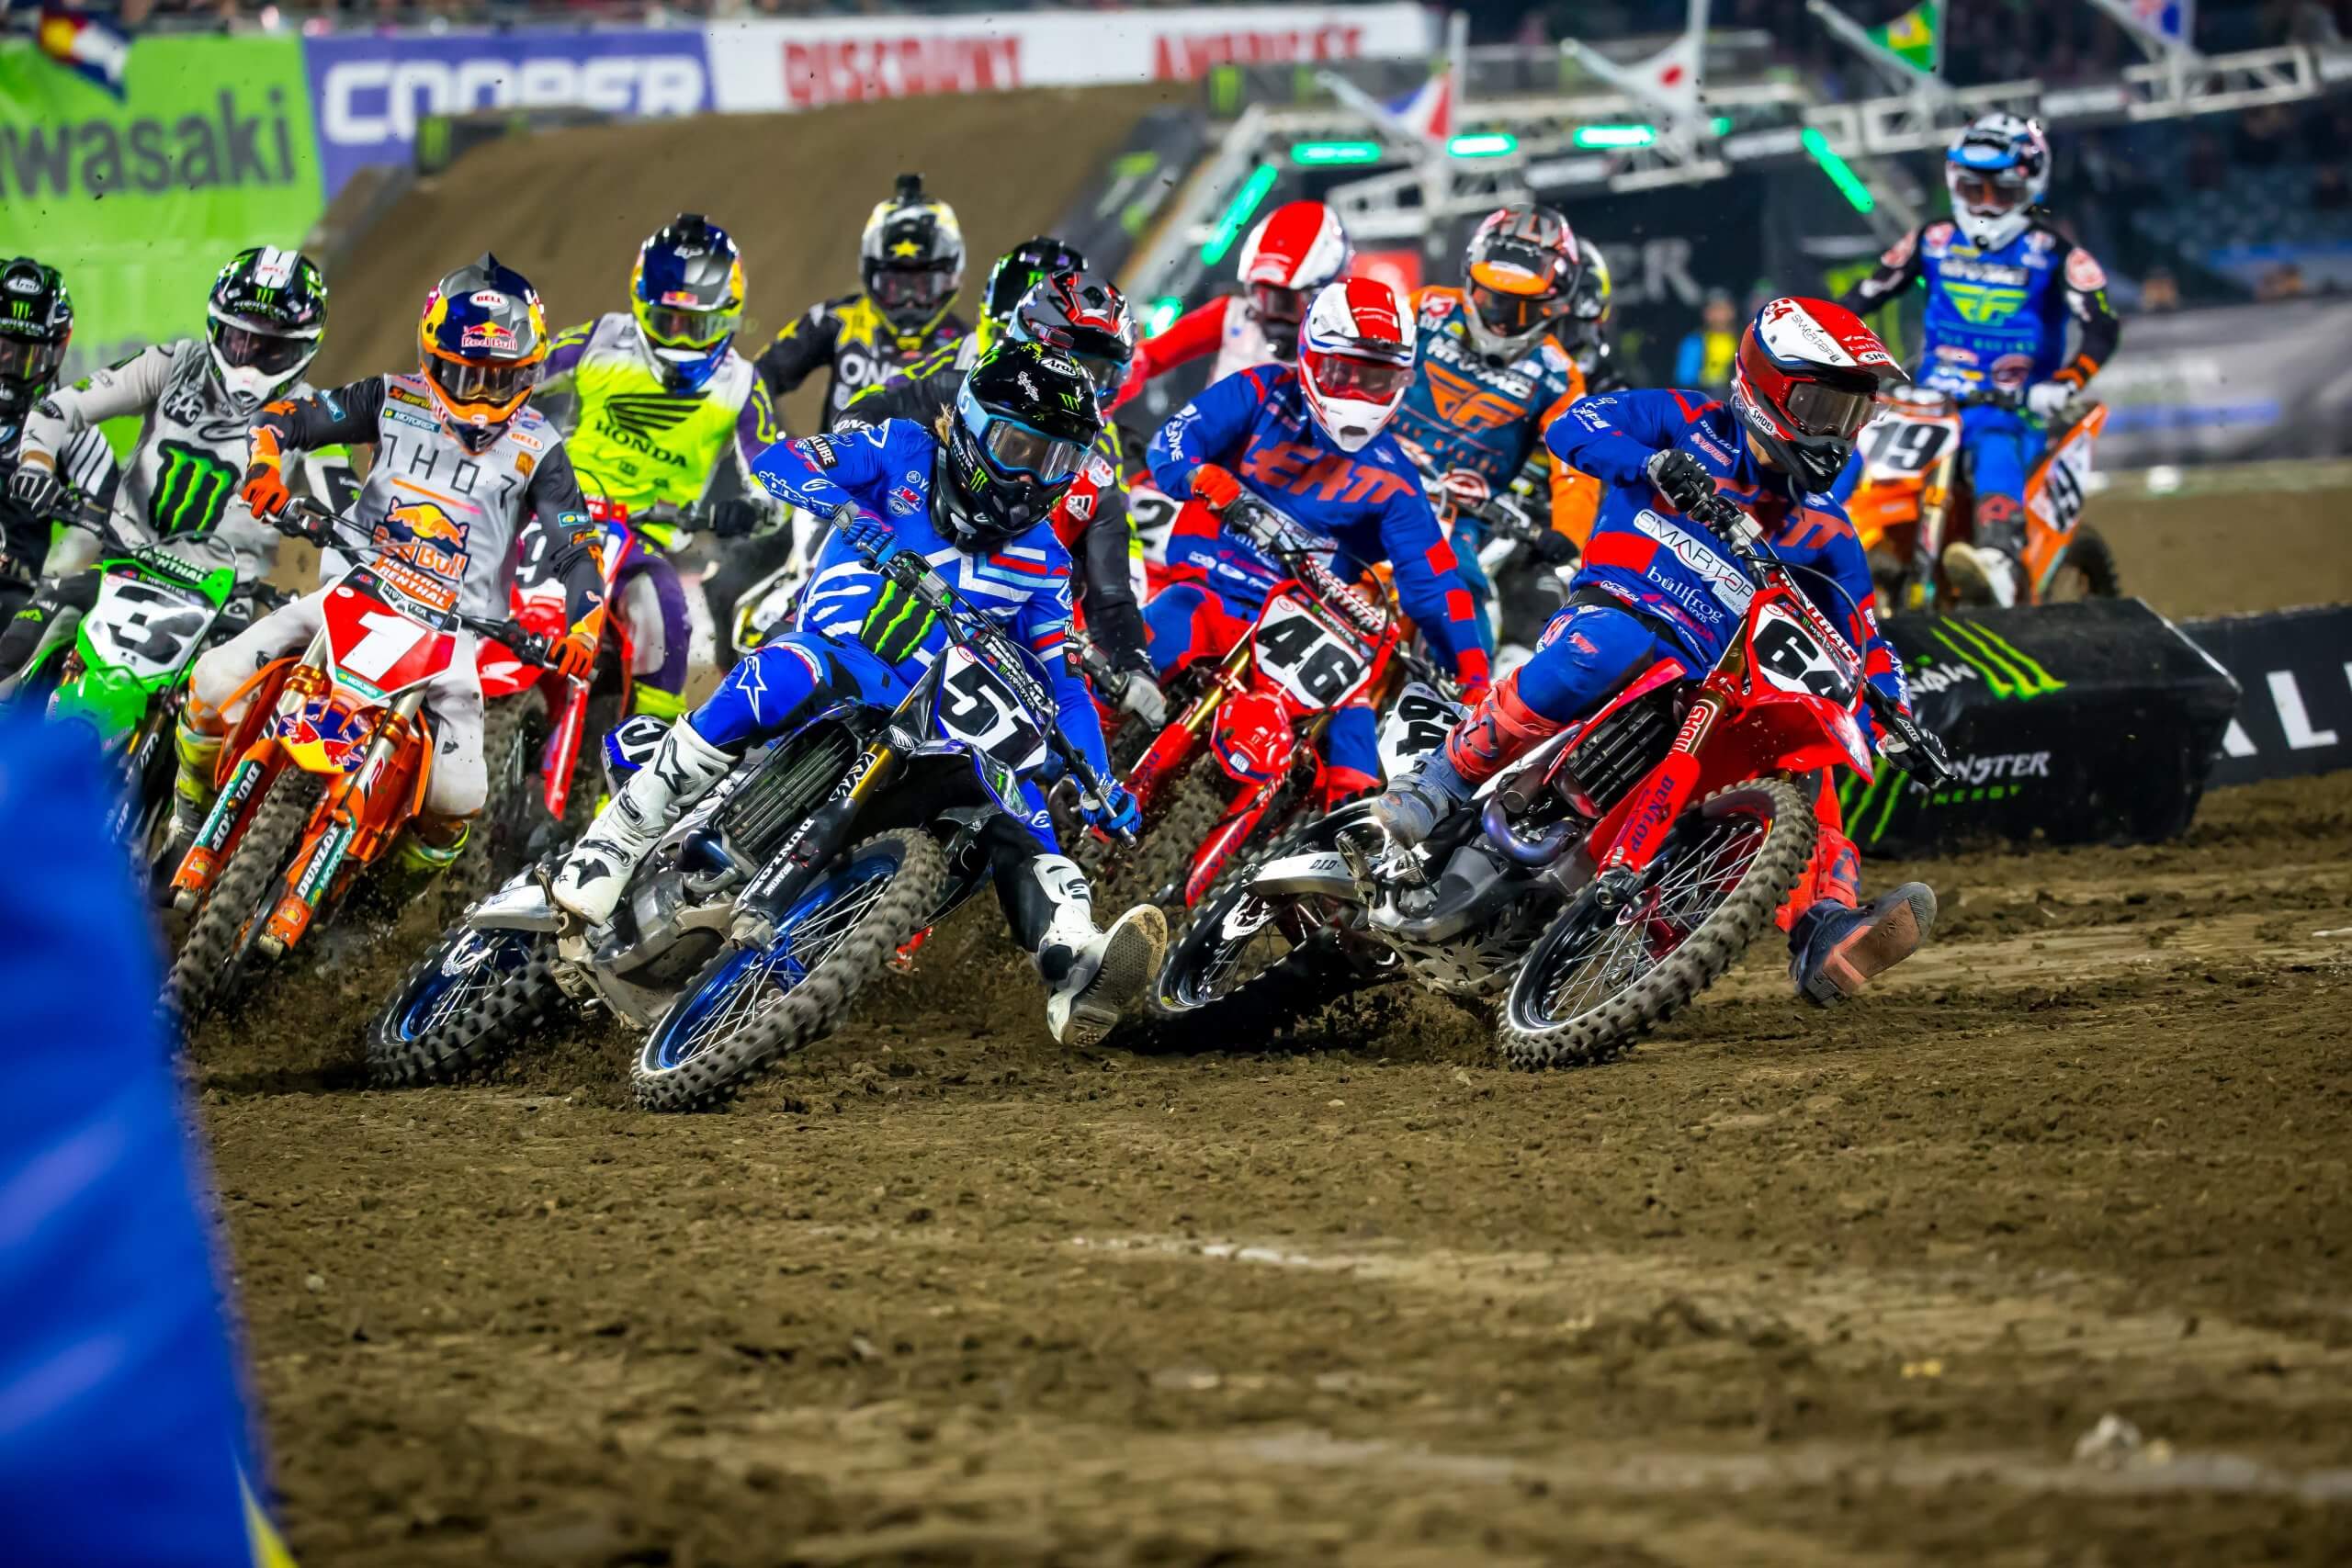 West coast snubbed in USA Supercross 2021 MotoHead